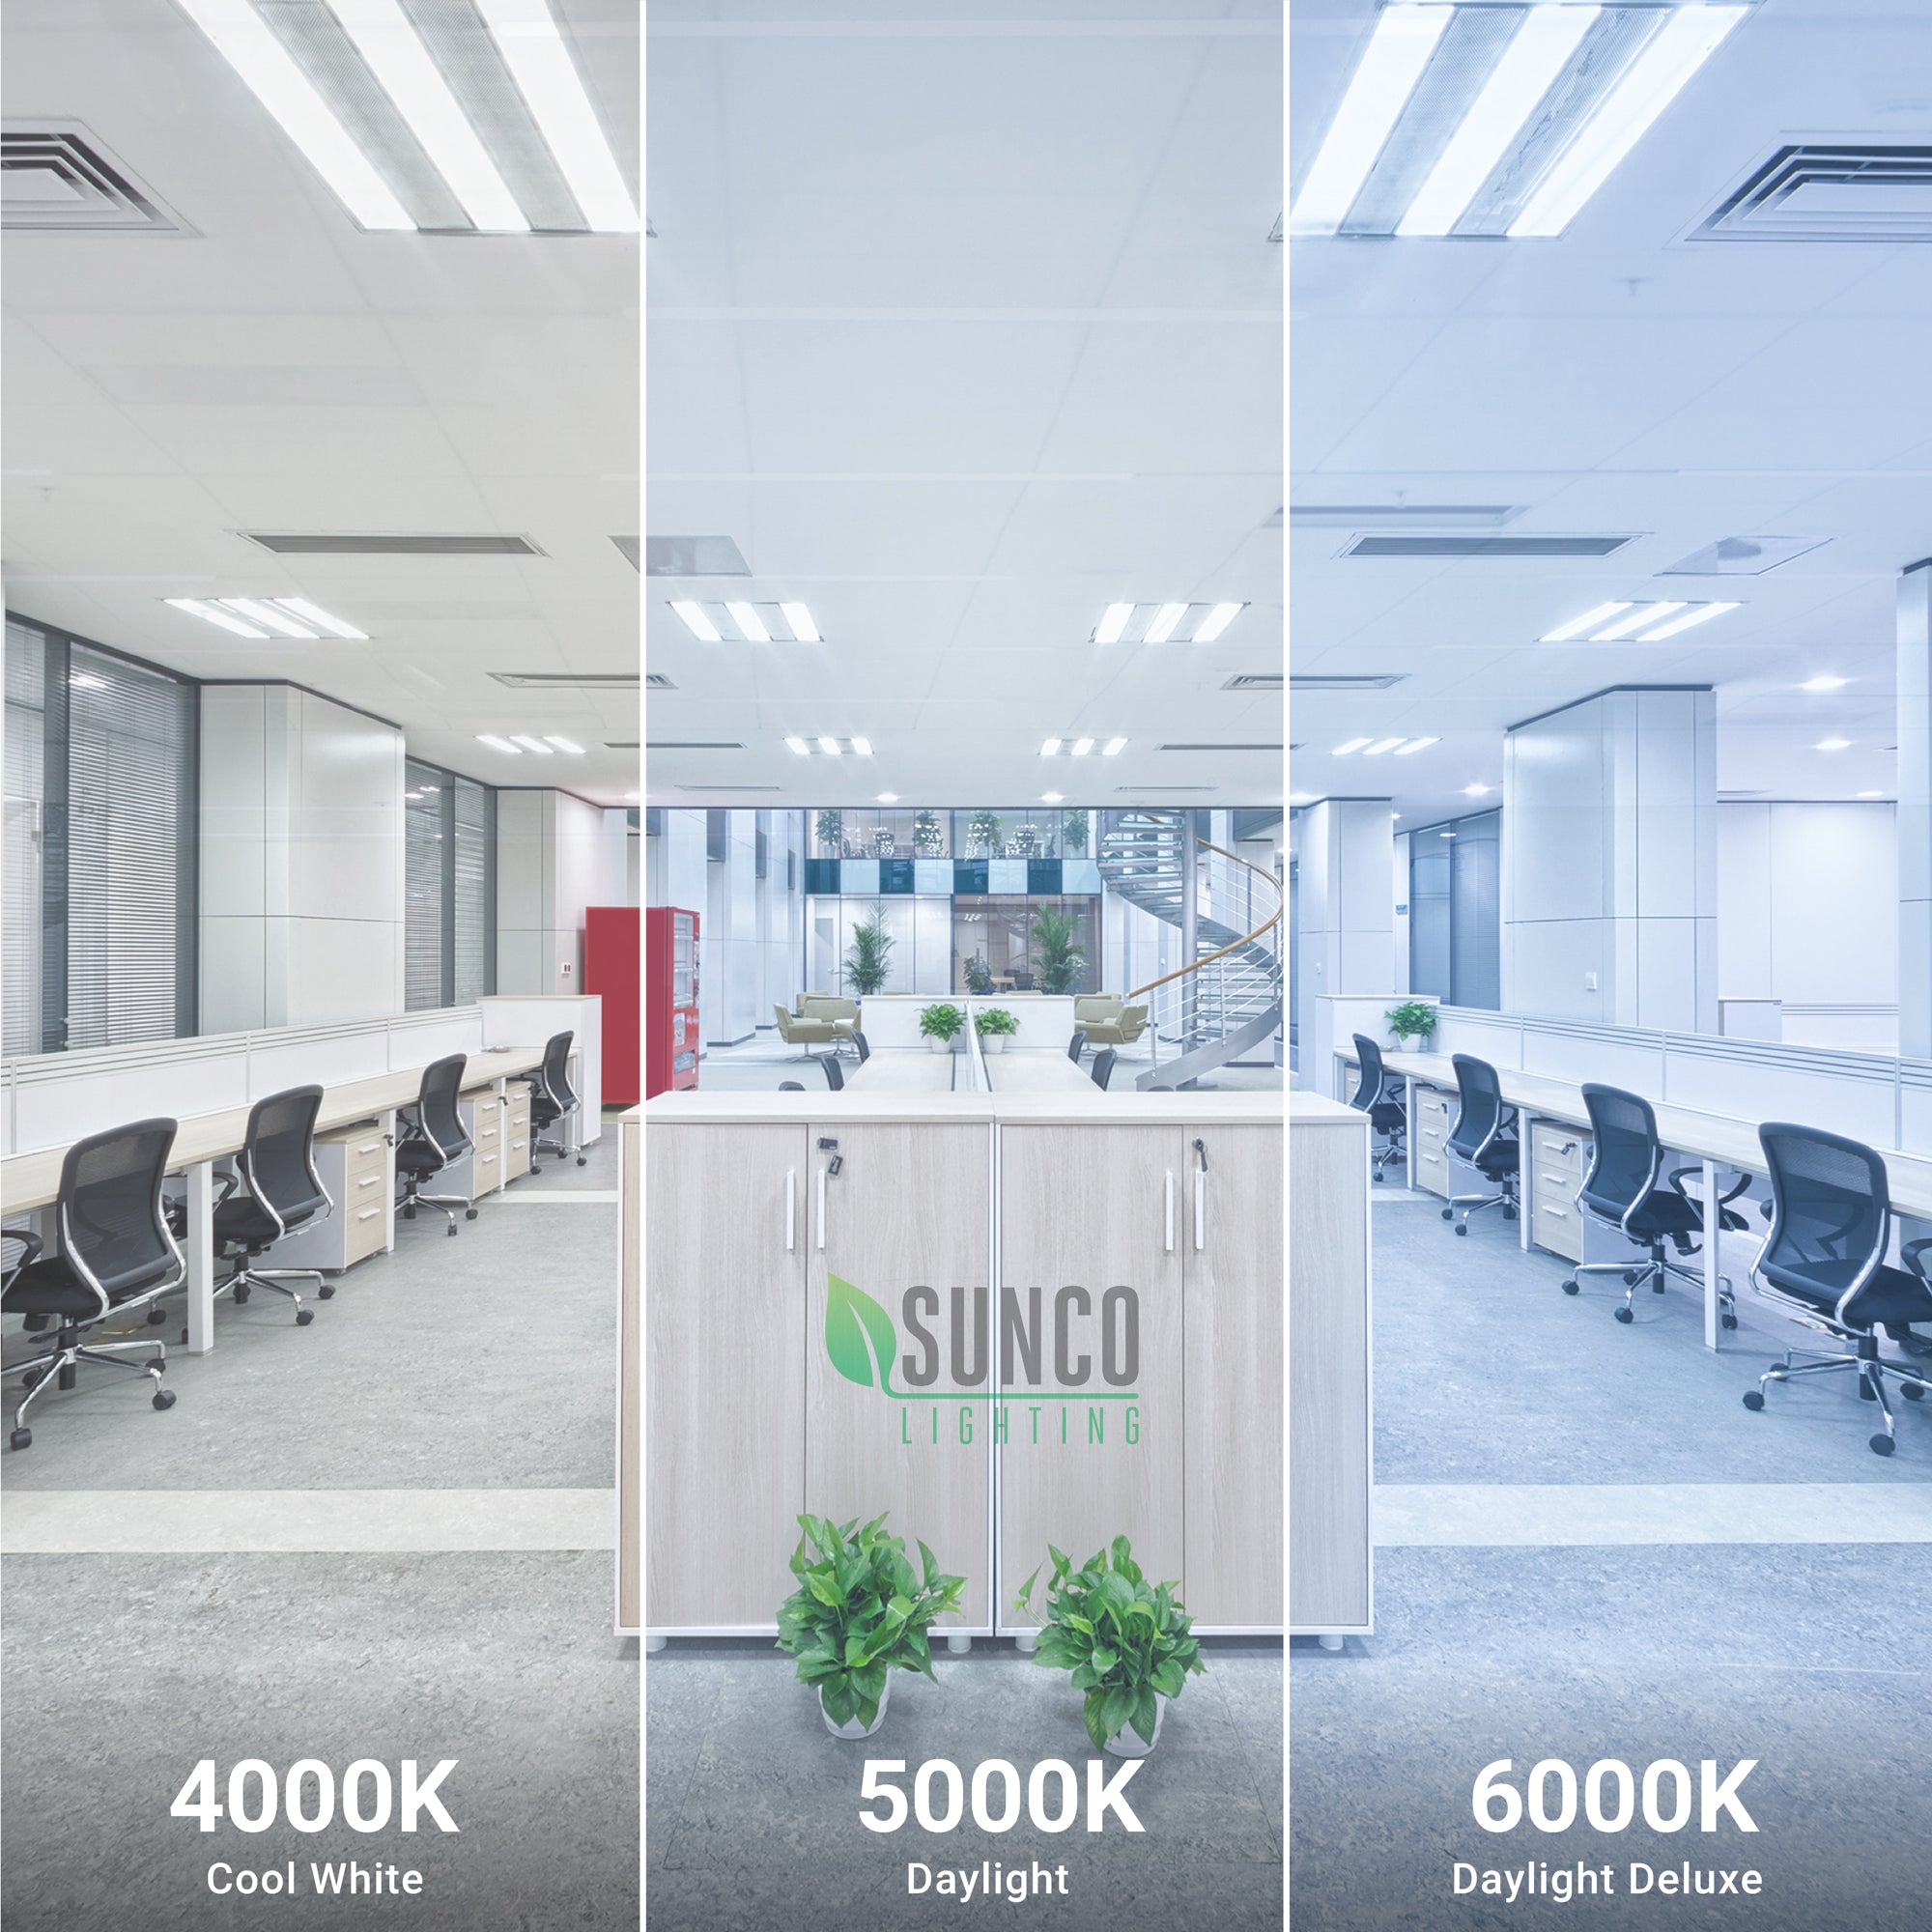 Choose color temperature from 4000K Cool White to 5000K Daylight to 6000K Daylight Deluxe. Using a different color temperature allows you to adjust the lighting to suit the space. 5000K and 6000K are best for task lighting while 4000K is great for lighting a meeting room or hallway with more suitable light quality. Sunco Lighting offers many CCTs to suit your needs. Select color temperature before checkout.